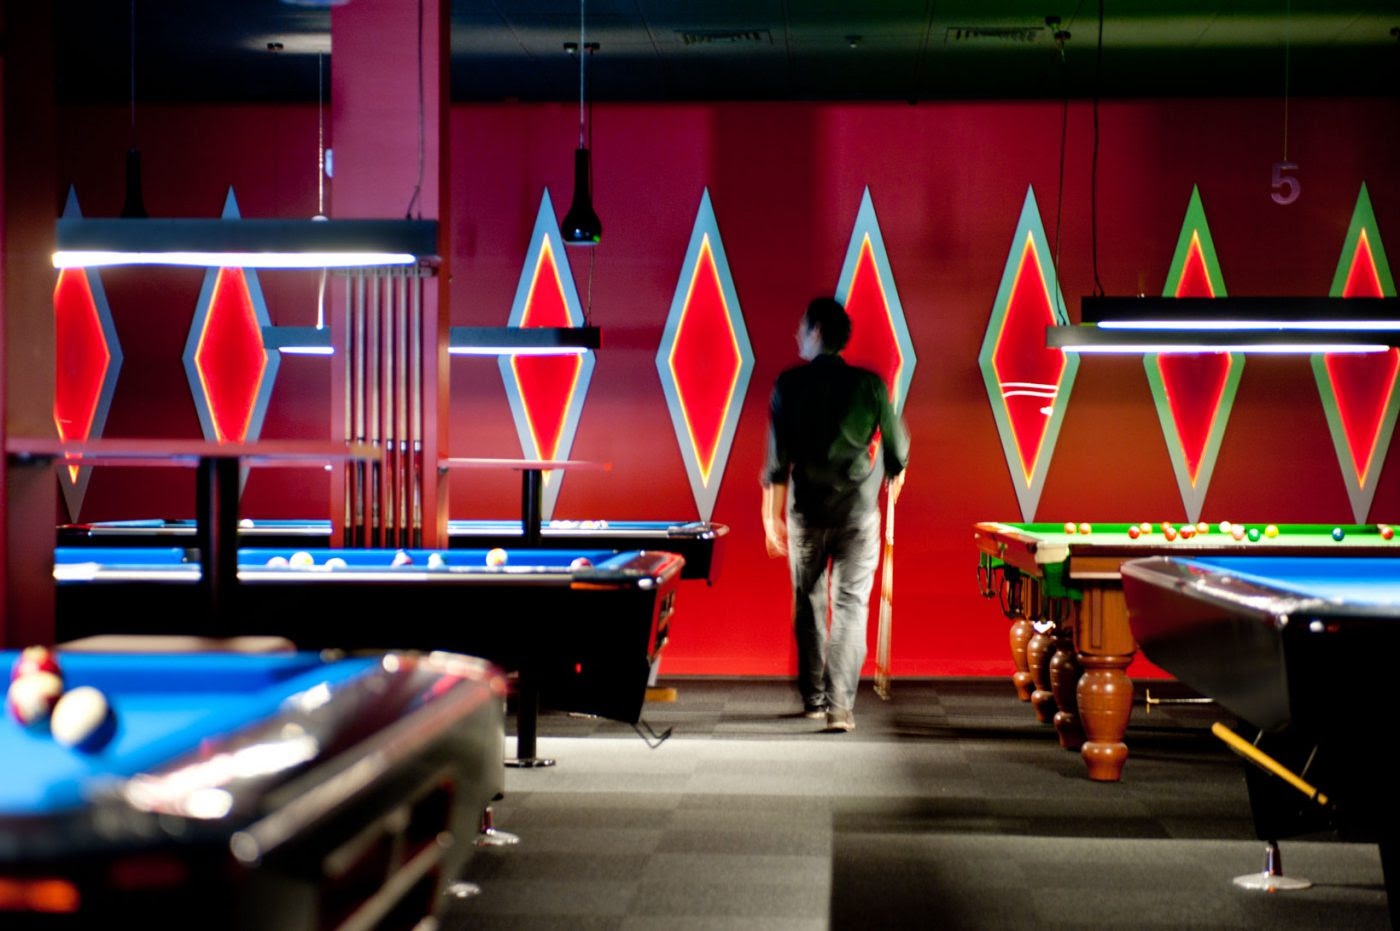 The slate room is a new pool bar on hobson street, right opposite sky city casino. The Slate Room Jose Gutierrez